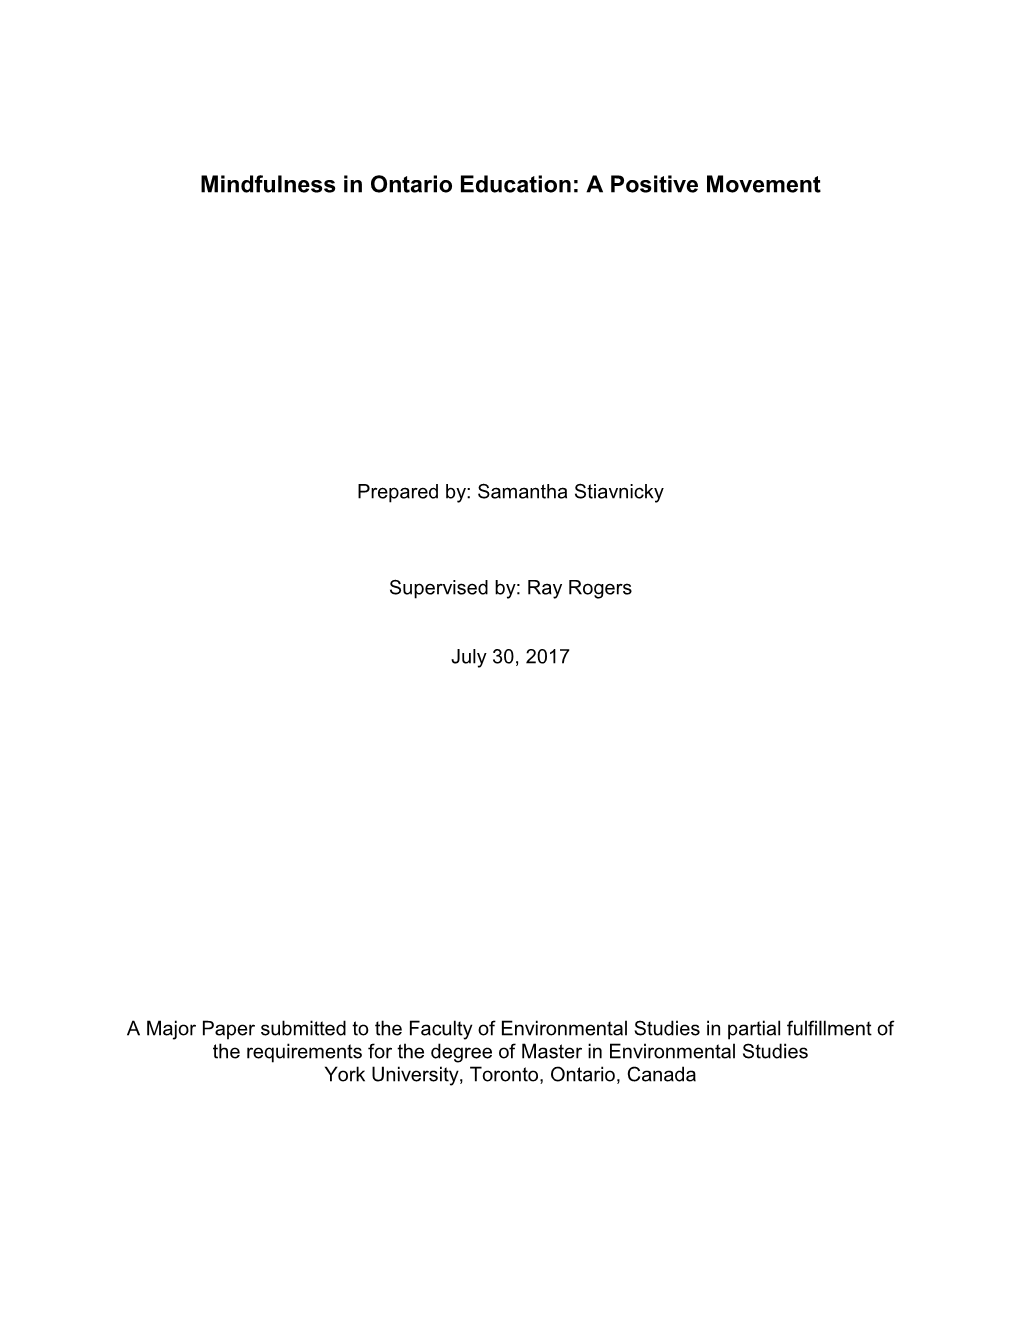 Mindfulness in Ontario Education: a Positive Movement